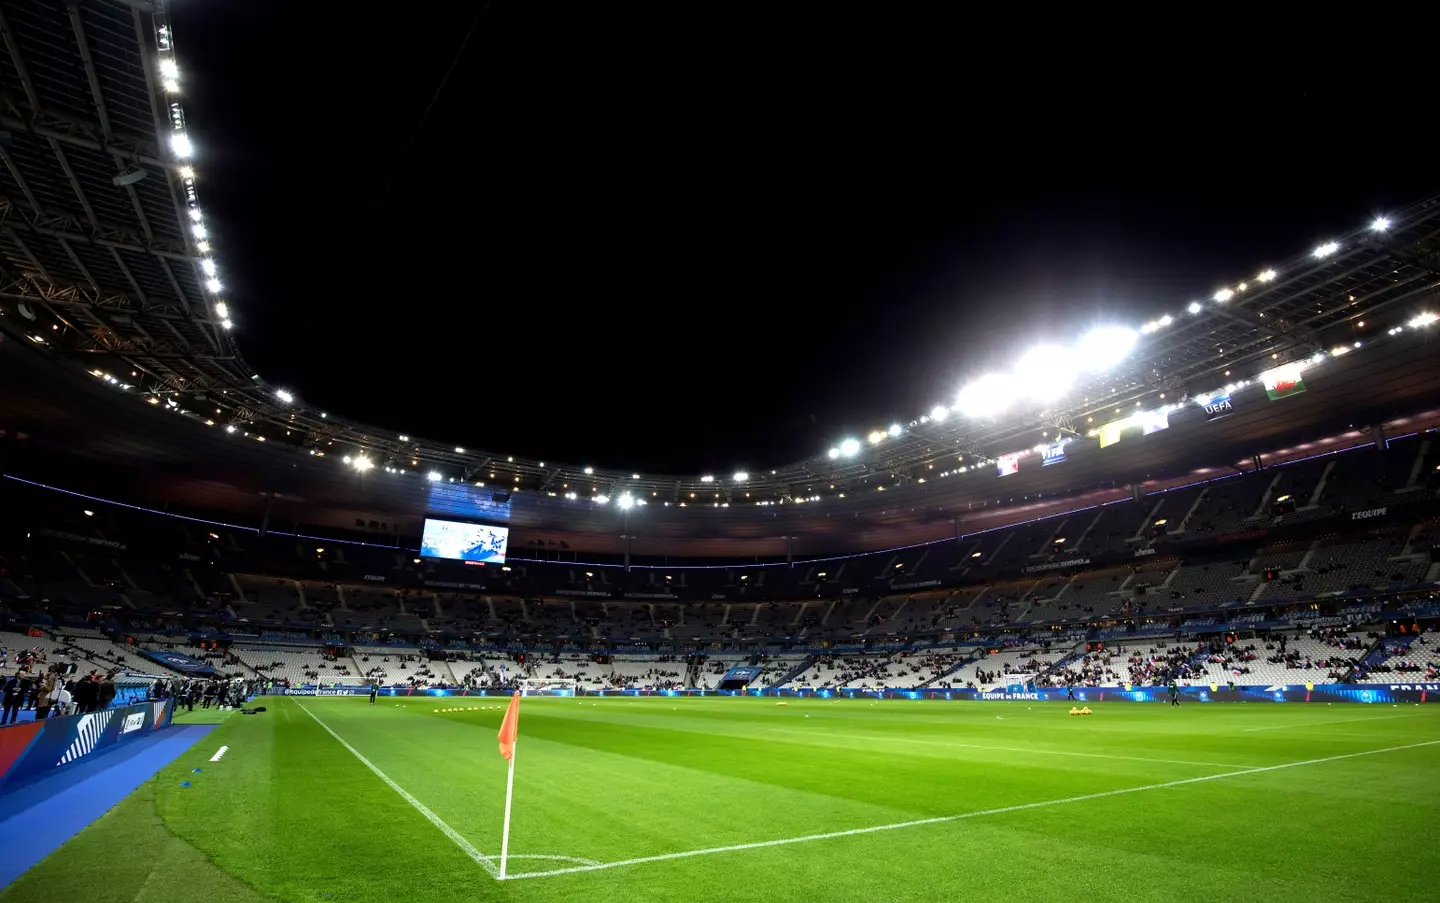 The Stade de France in Paris will now host this season's final (Image: PA)